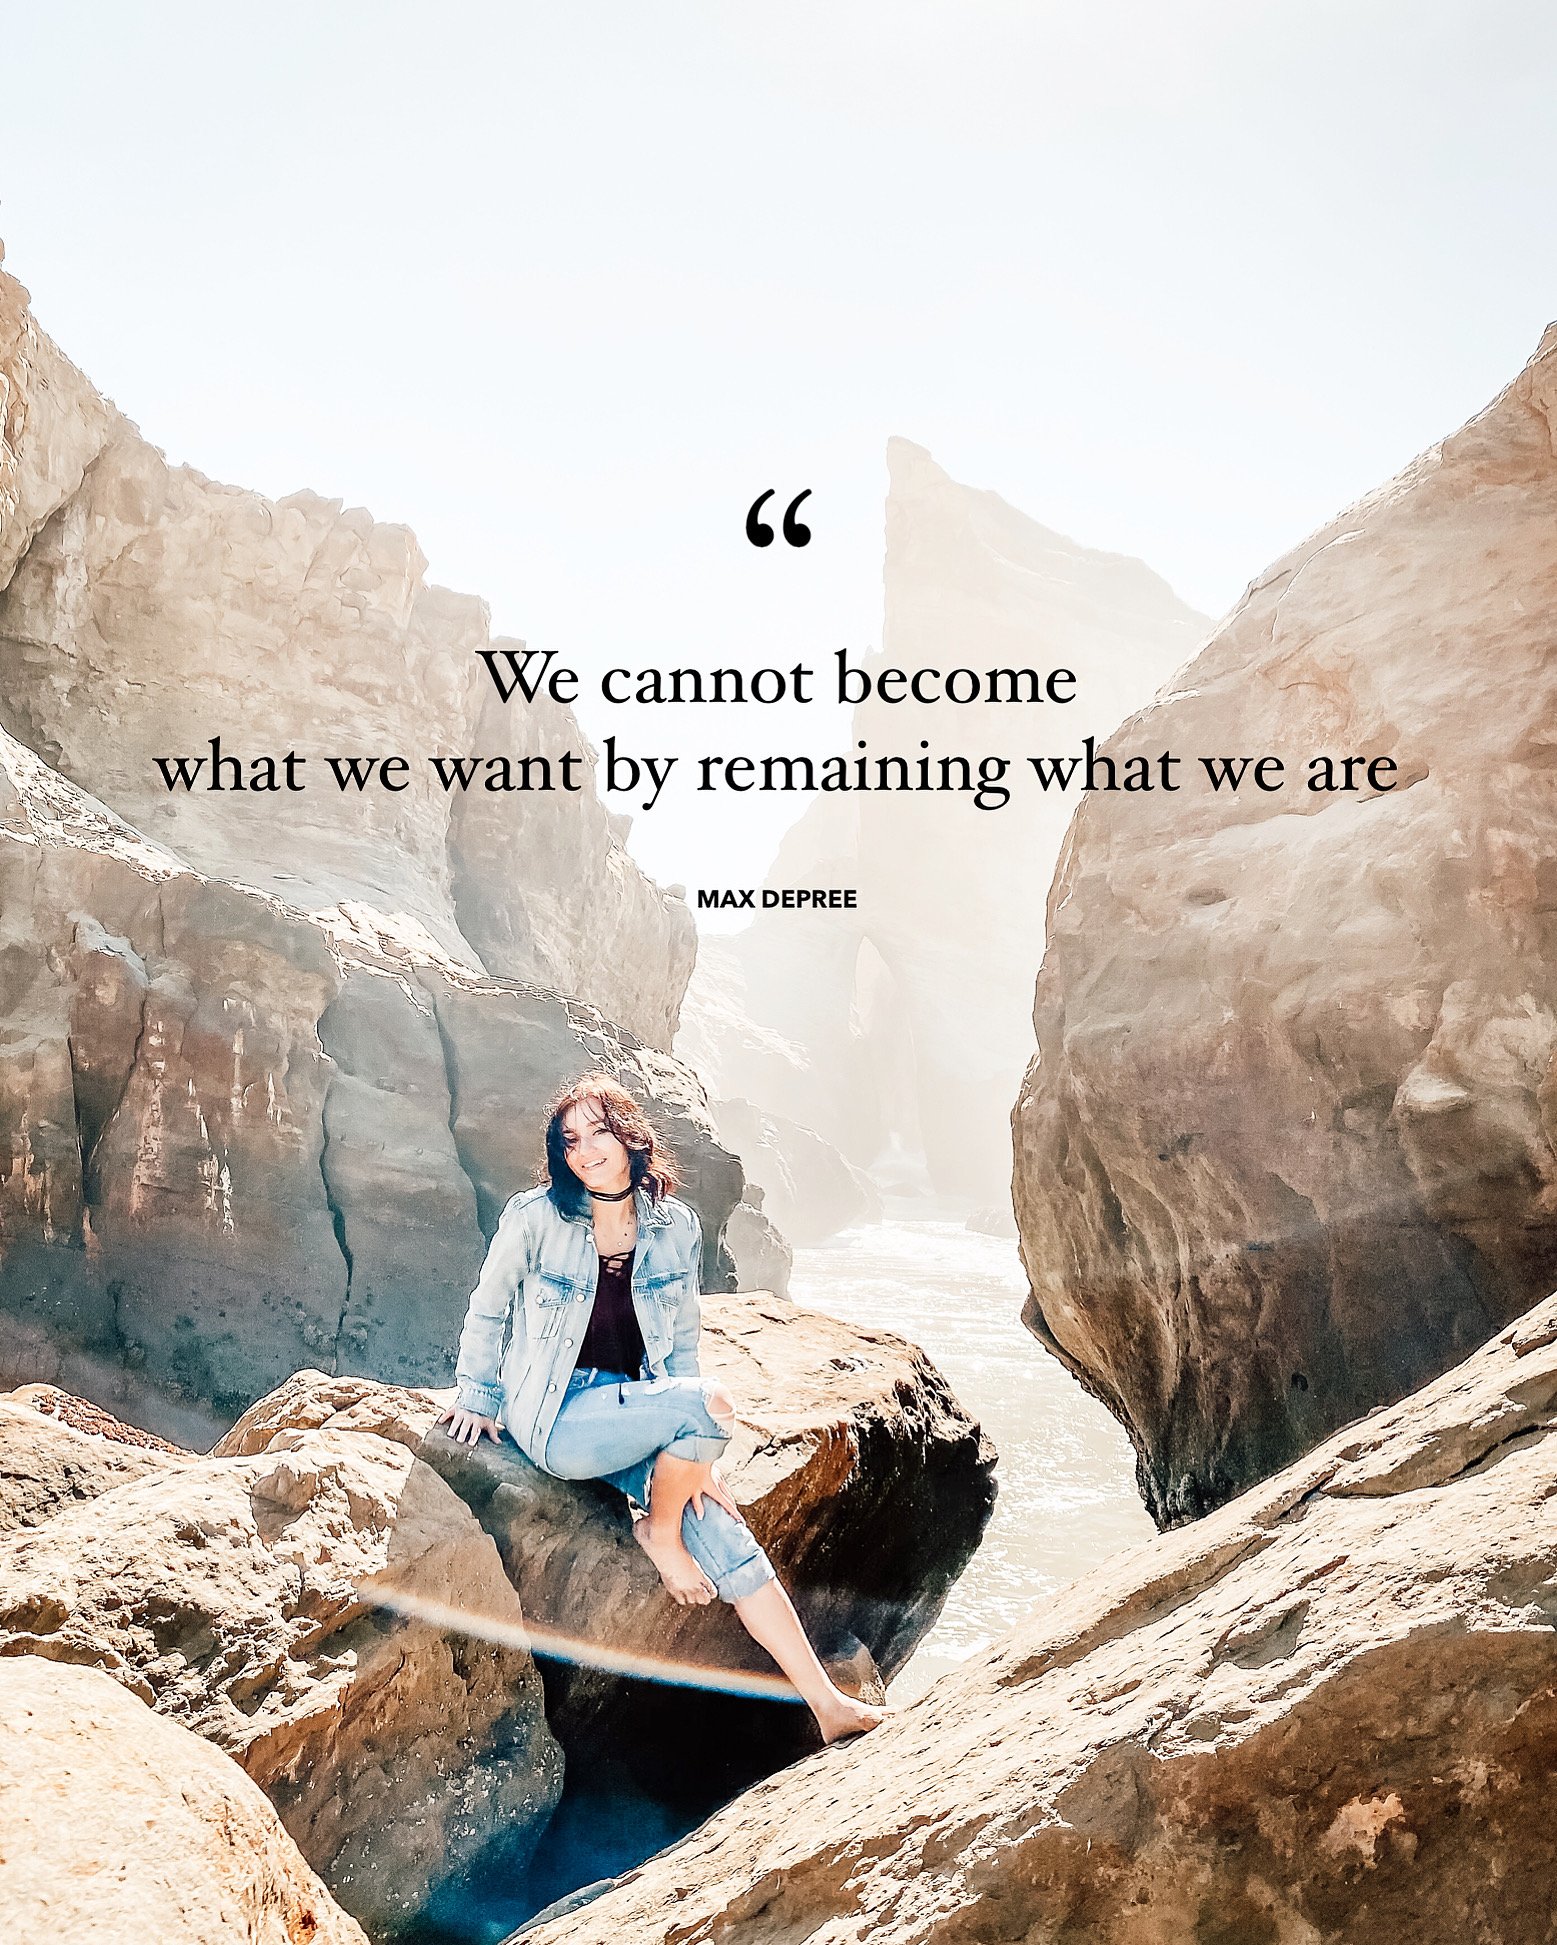 “We cannot become what we want by remaining what we are.” ~ Max DePree.